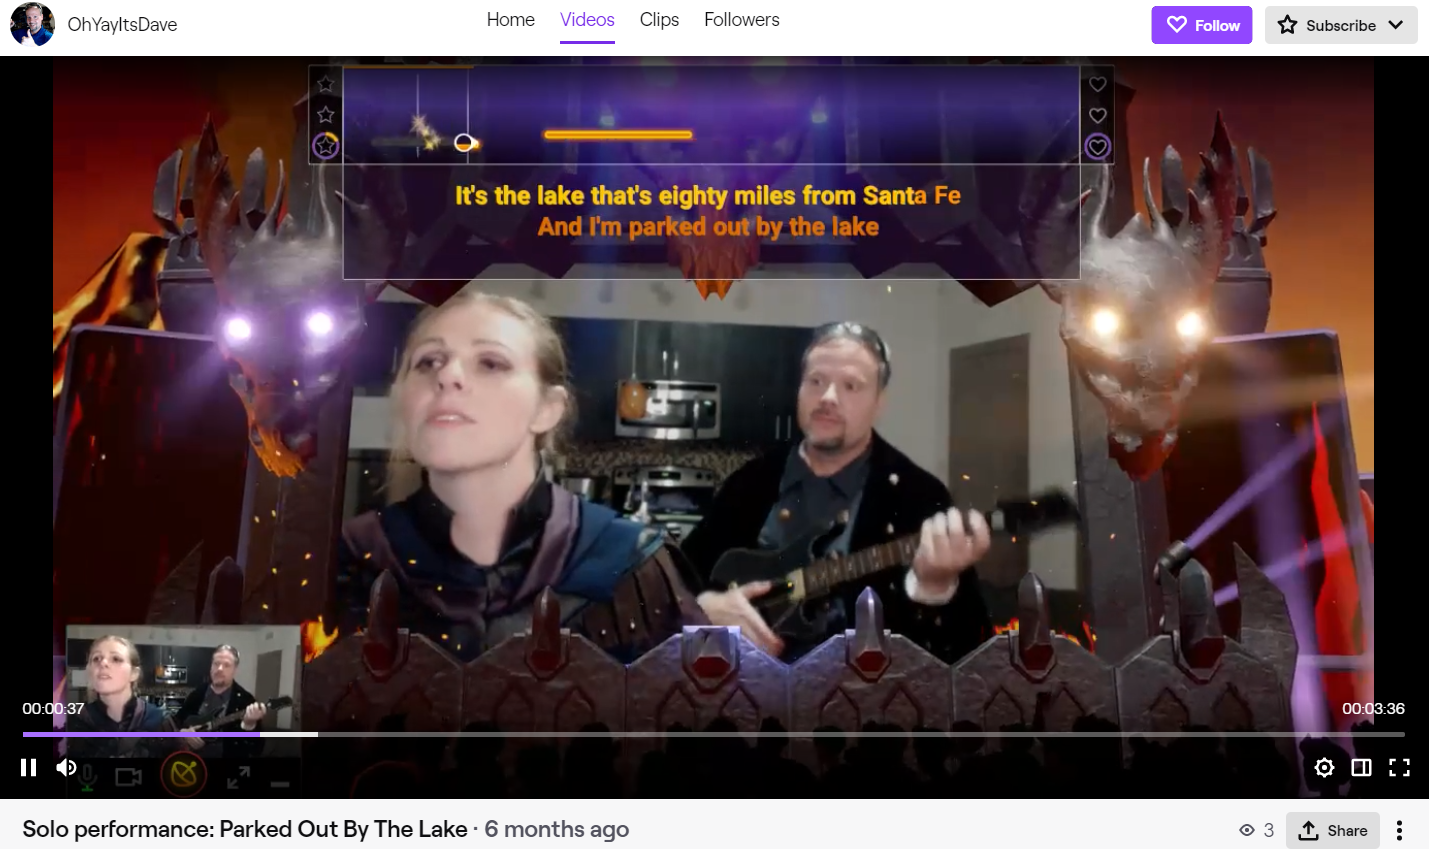 Twitch Sings: Parked Out By The Lake by Dean Summerwind 